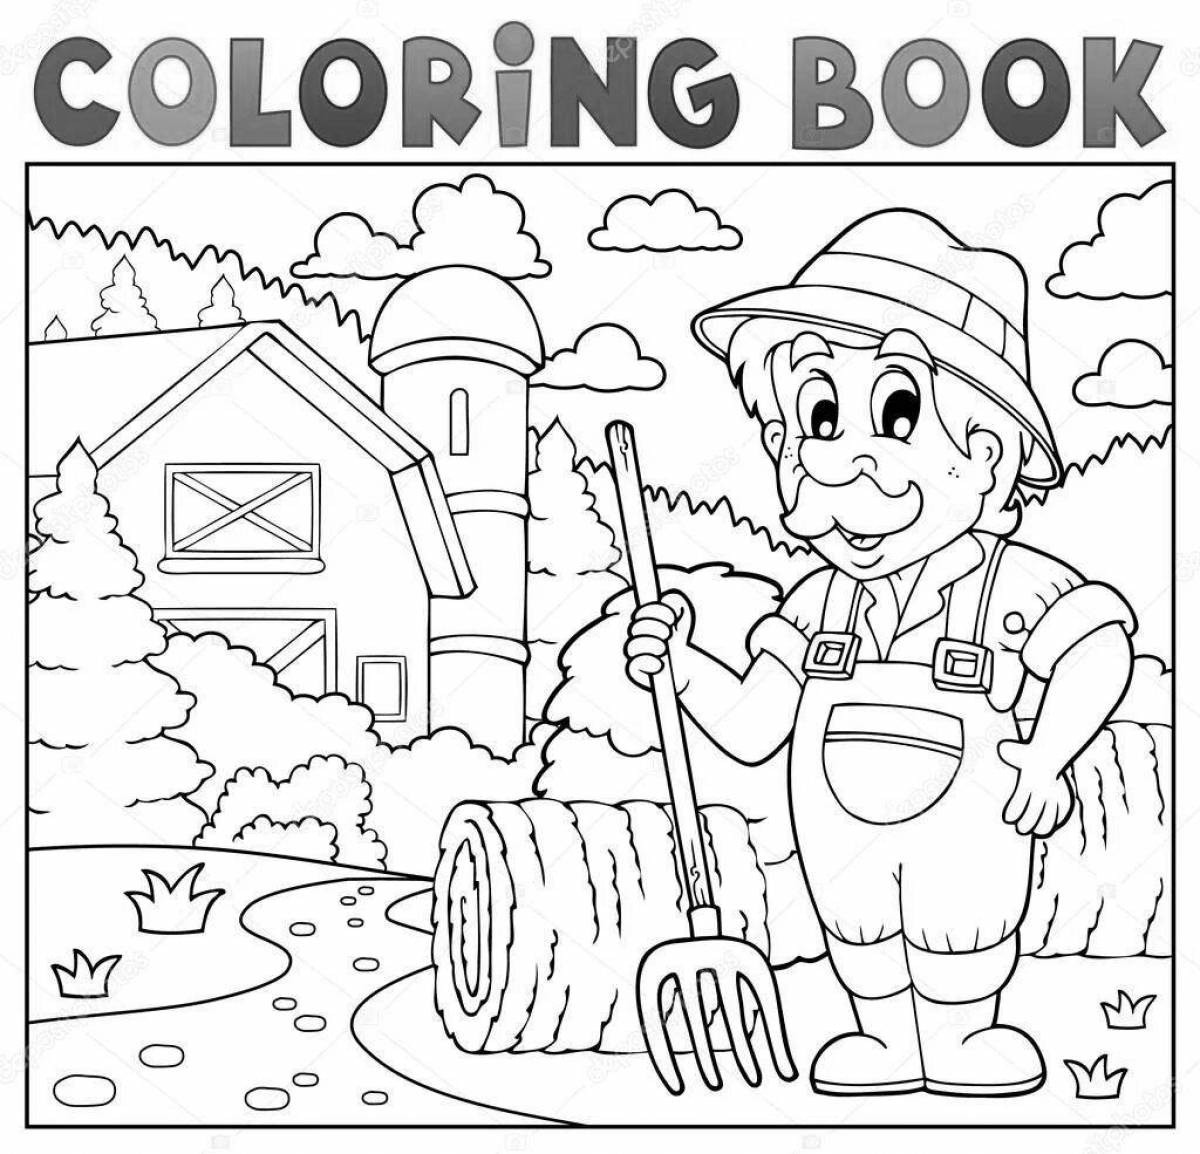 Coloring page funny farmer for kids